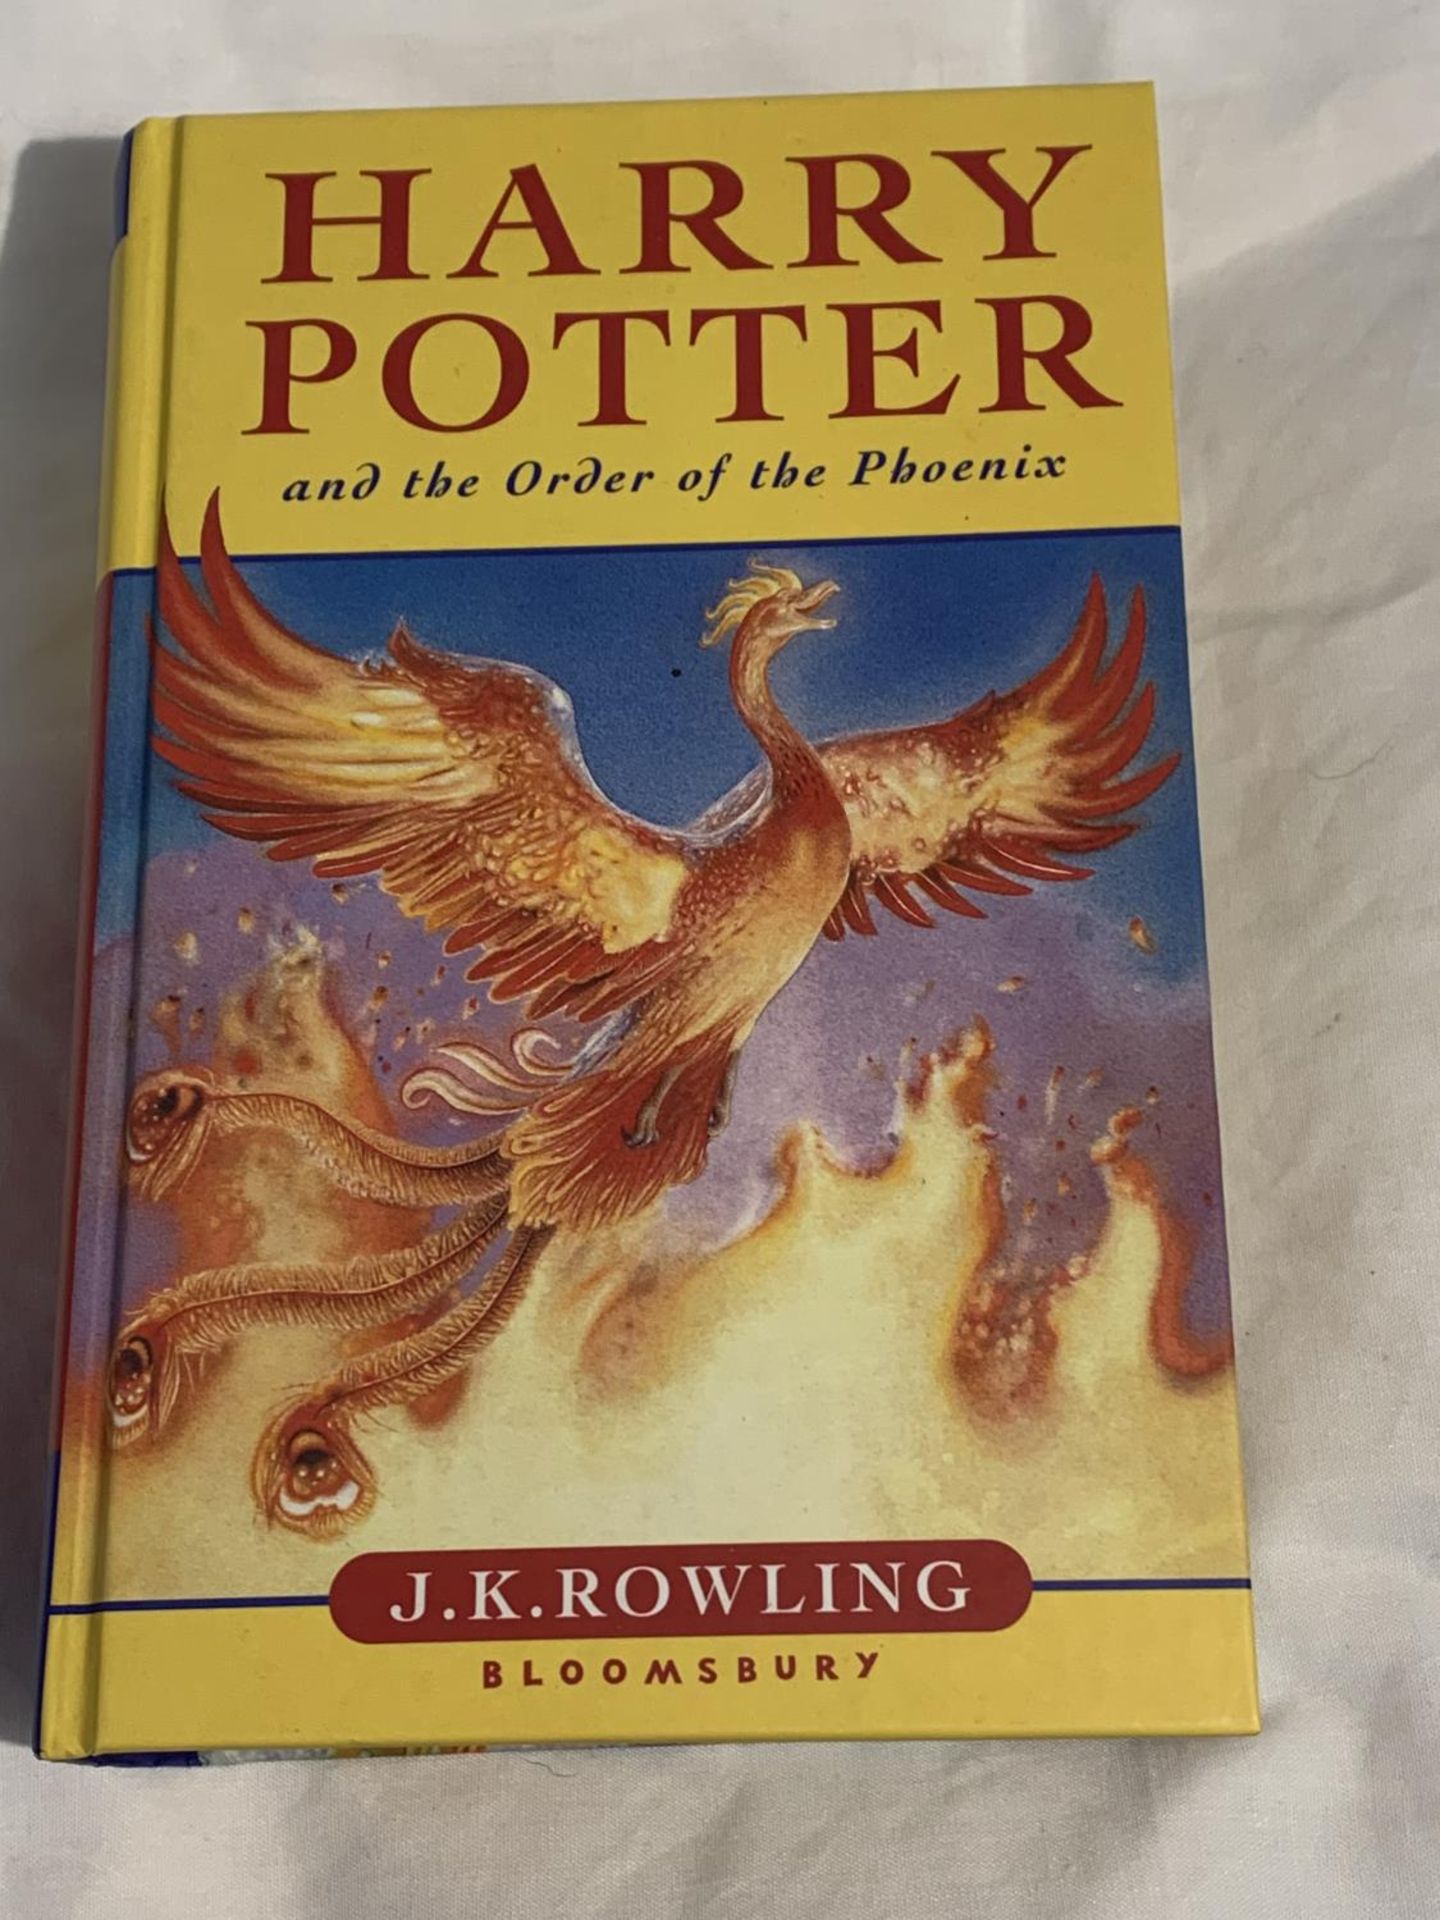 A HARDBACK FIRST EDITION - HARRY POTTER AND THE ORDER OF THE PHOENIX, NO DUST JACKET BY J.K.